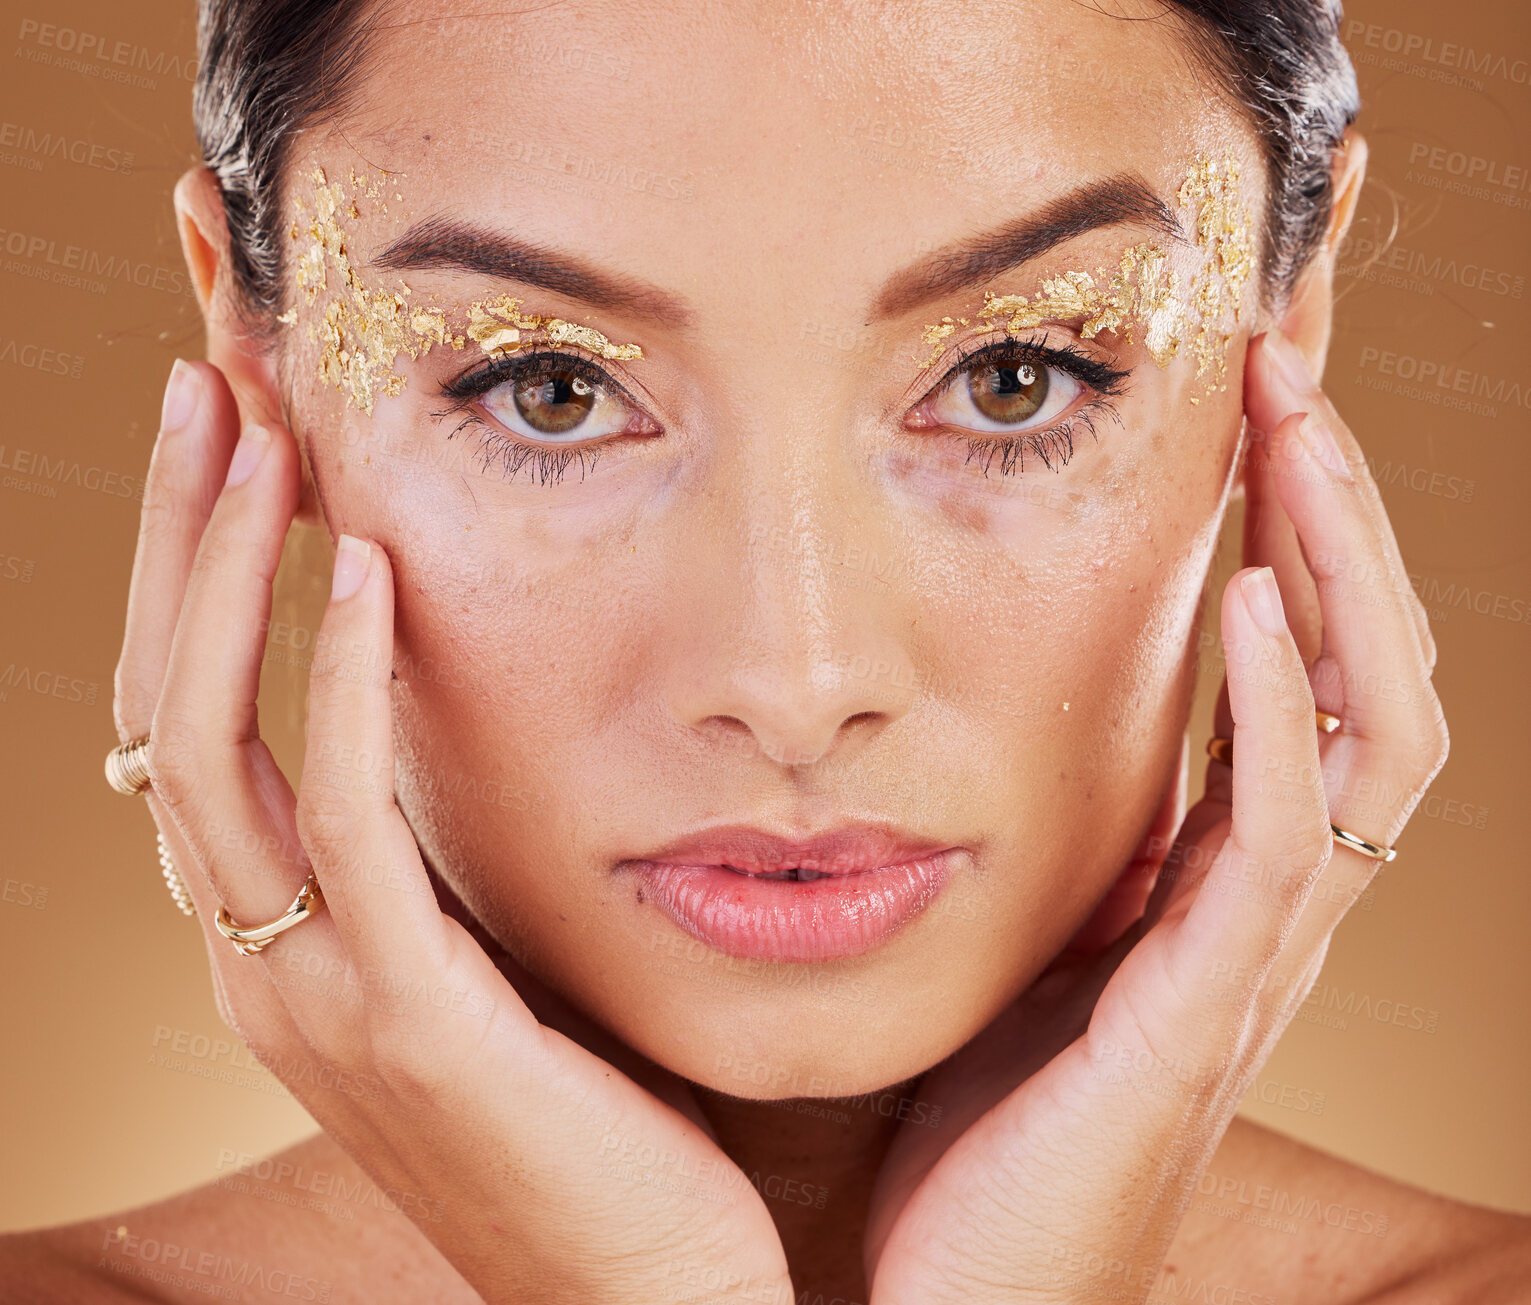 Buy stock photo Makeup, glitter and face portrait of woman with luxury gold eyeshadow, cosmetics product and facial skincare glow. Beauty, spa salon or aesthetic model girl with sparkle, shine or healthcare wellness